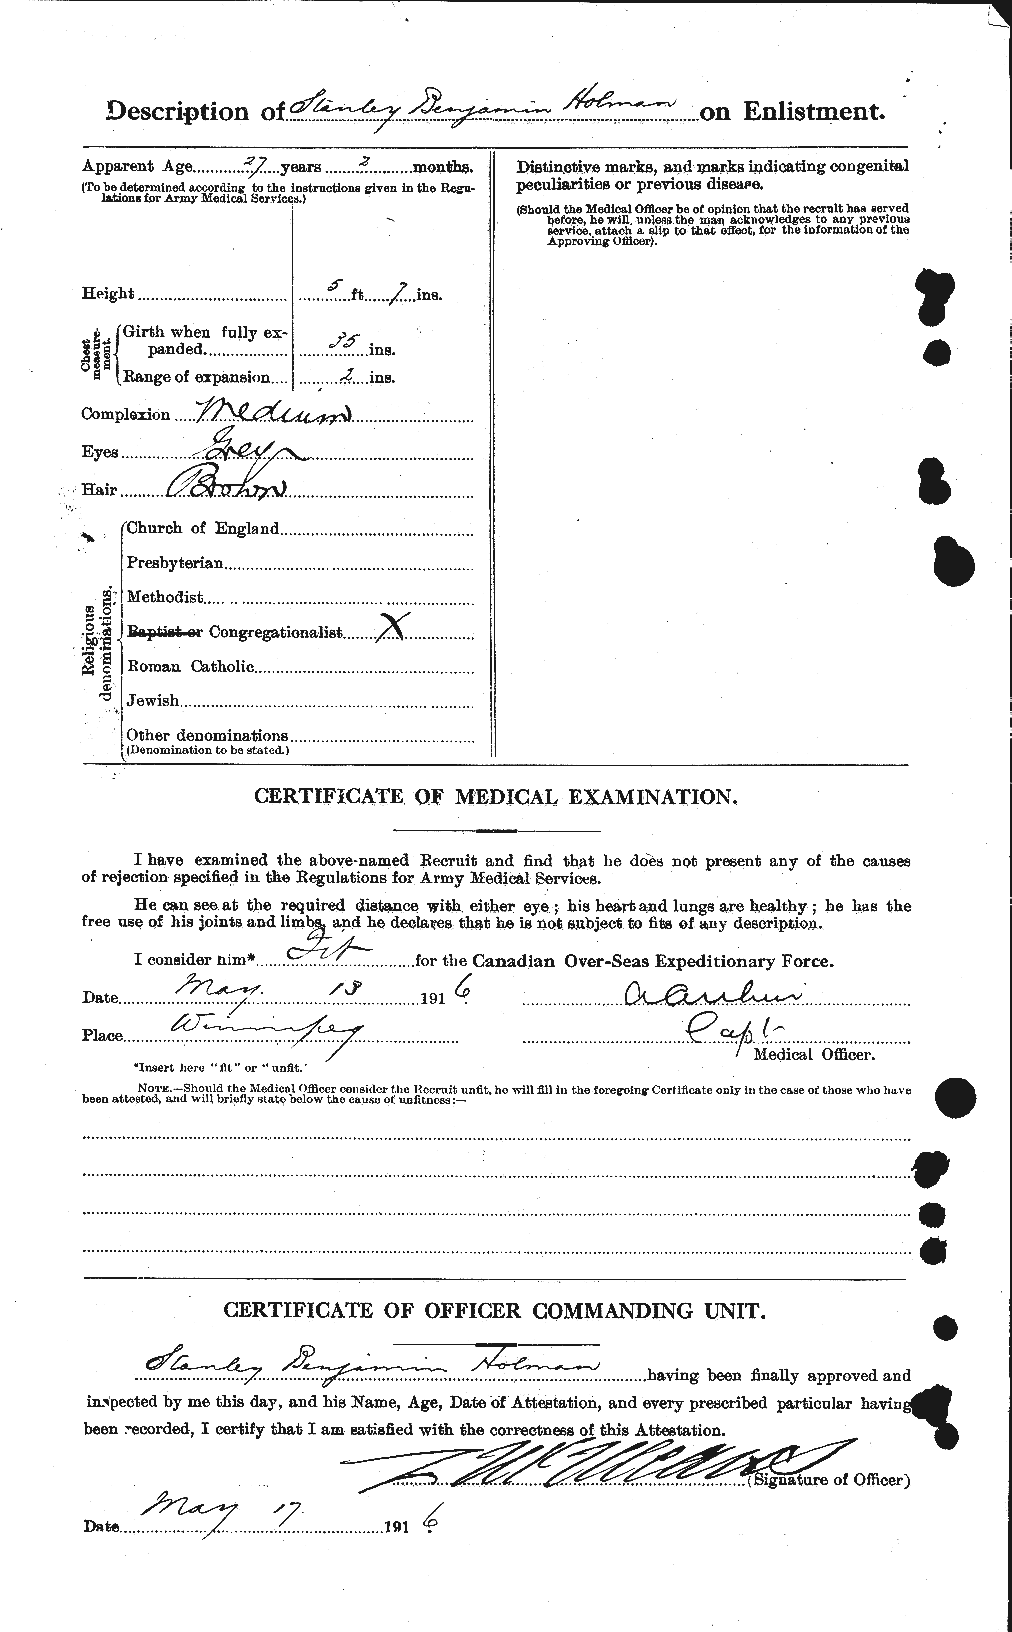 Personnel Records of the First World War - CEF 400259b